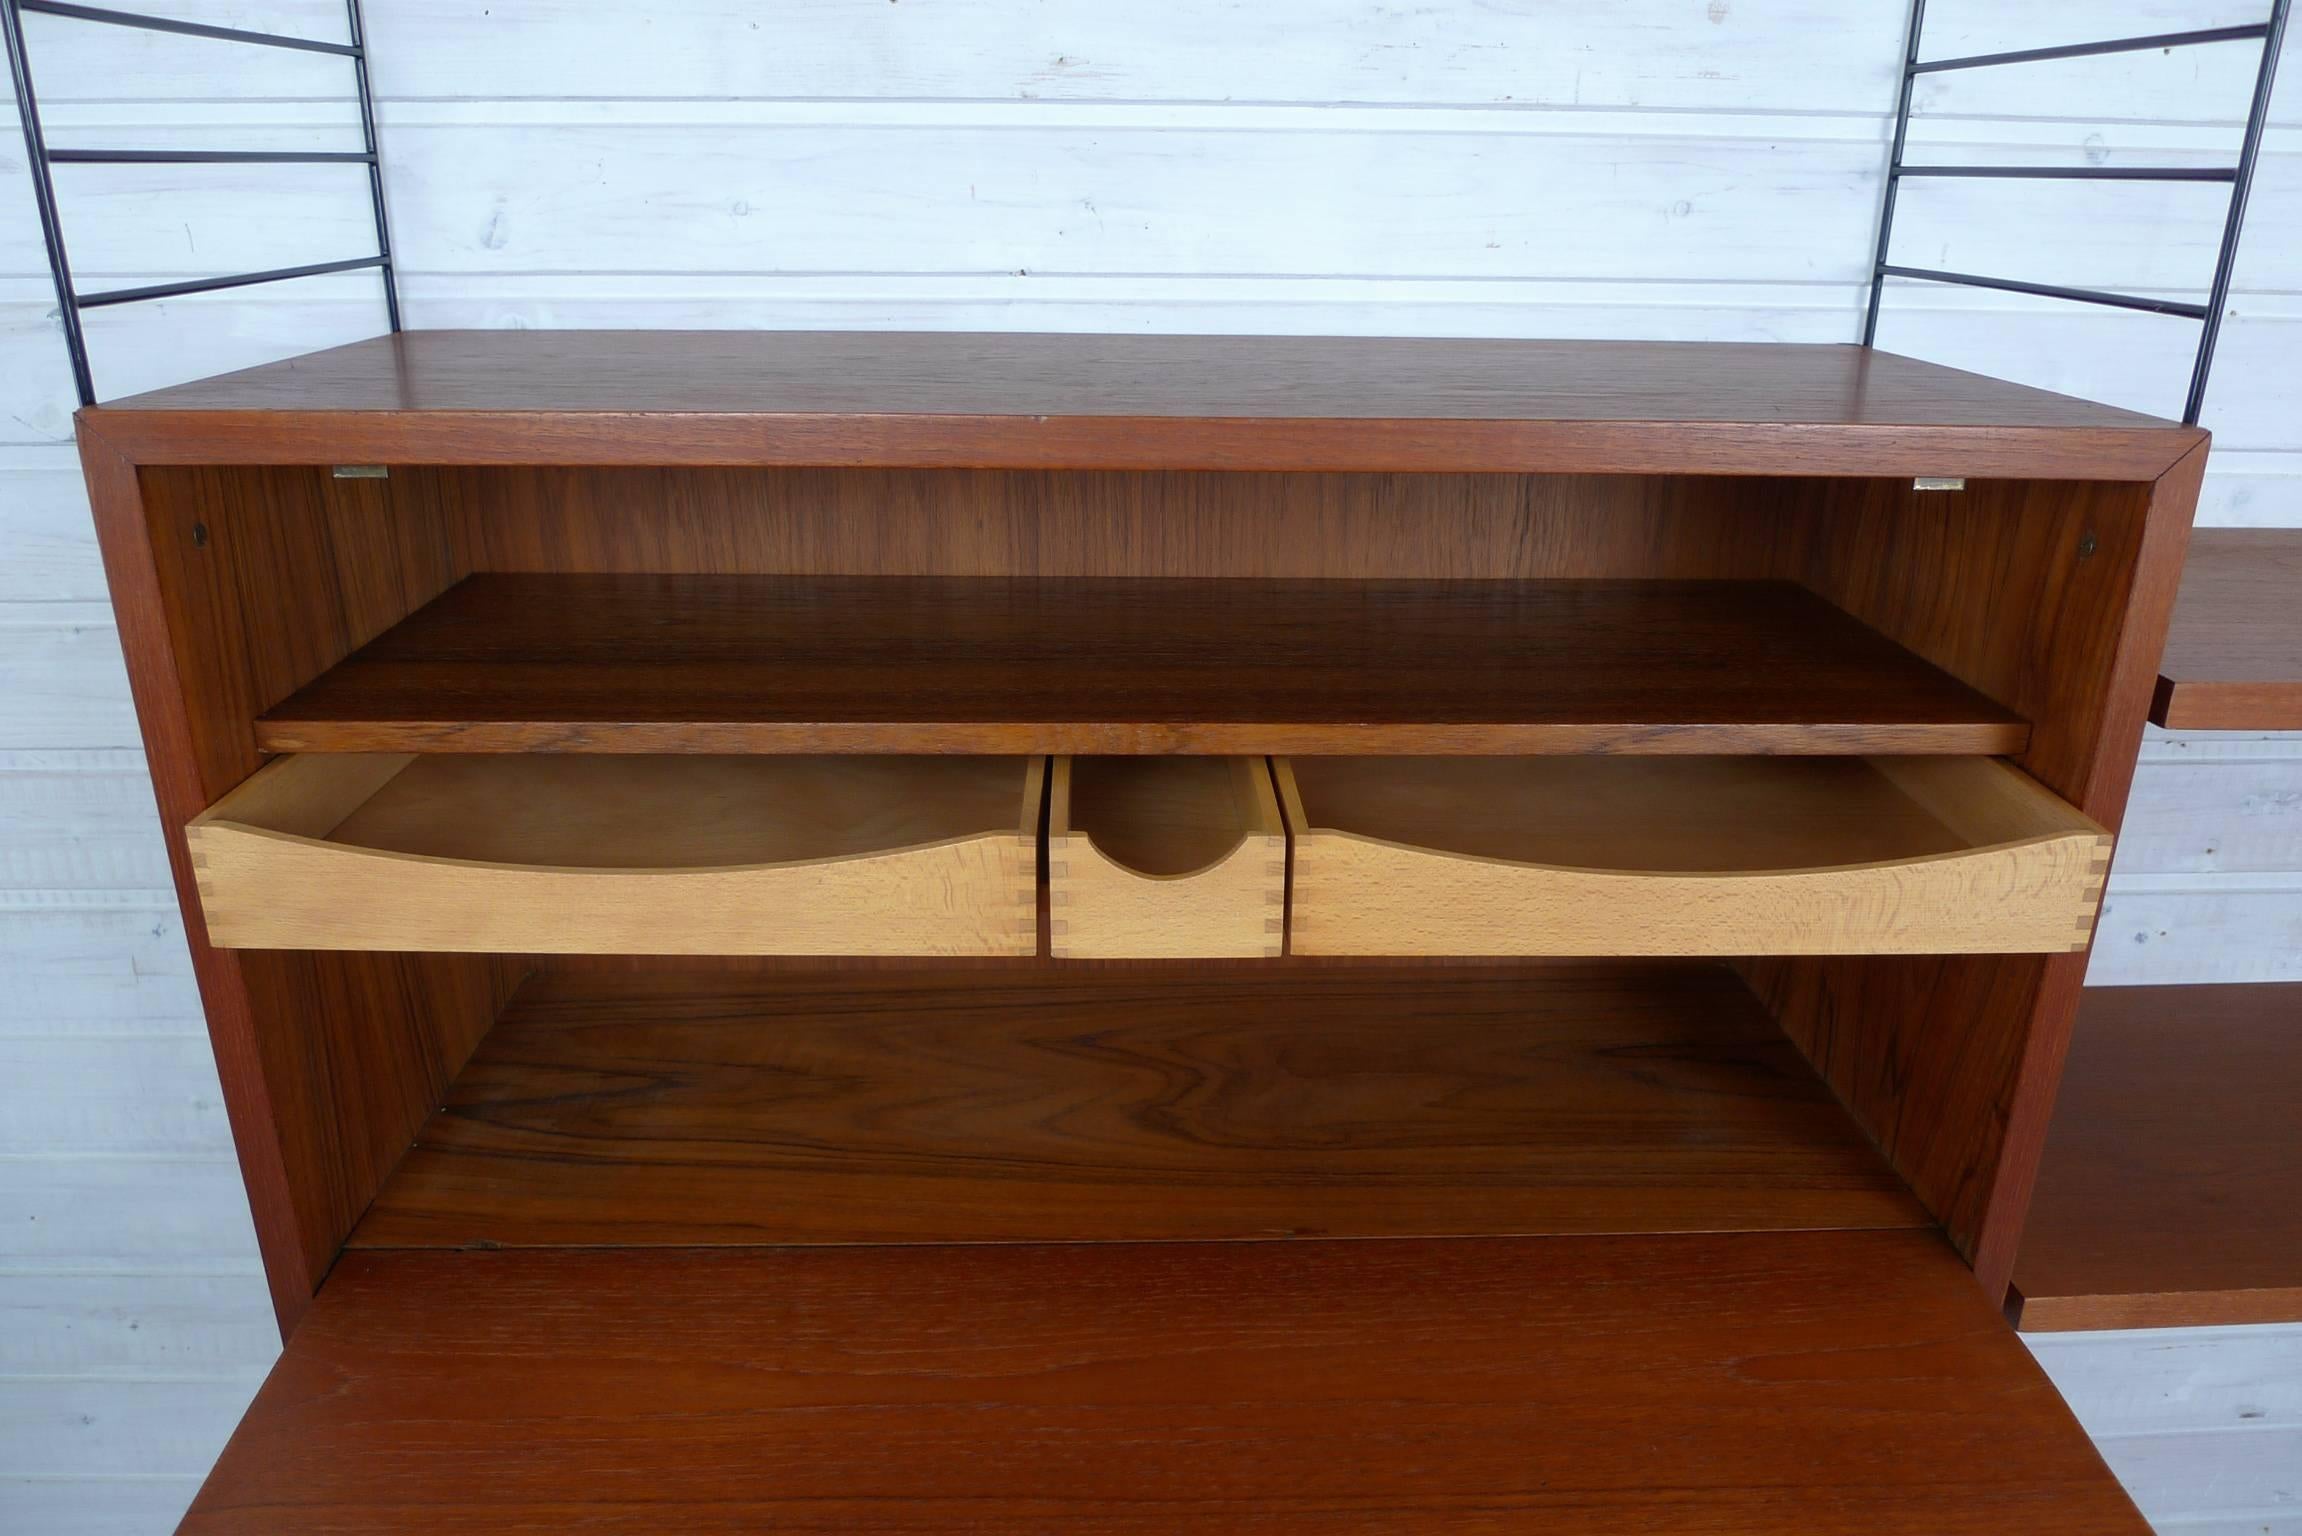 Swedish Wall Unit with Teak Box and Shelves by Nisse Strinning for String, 1950s For Sale 1